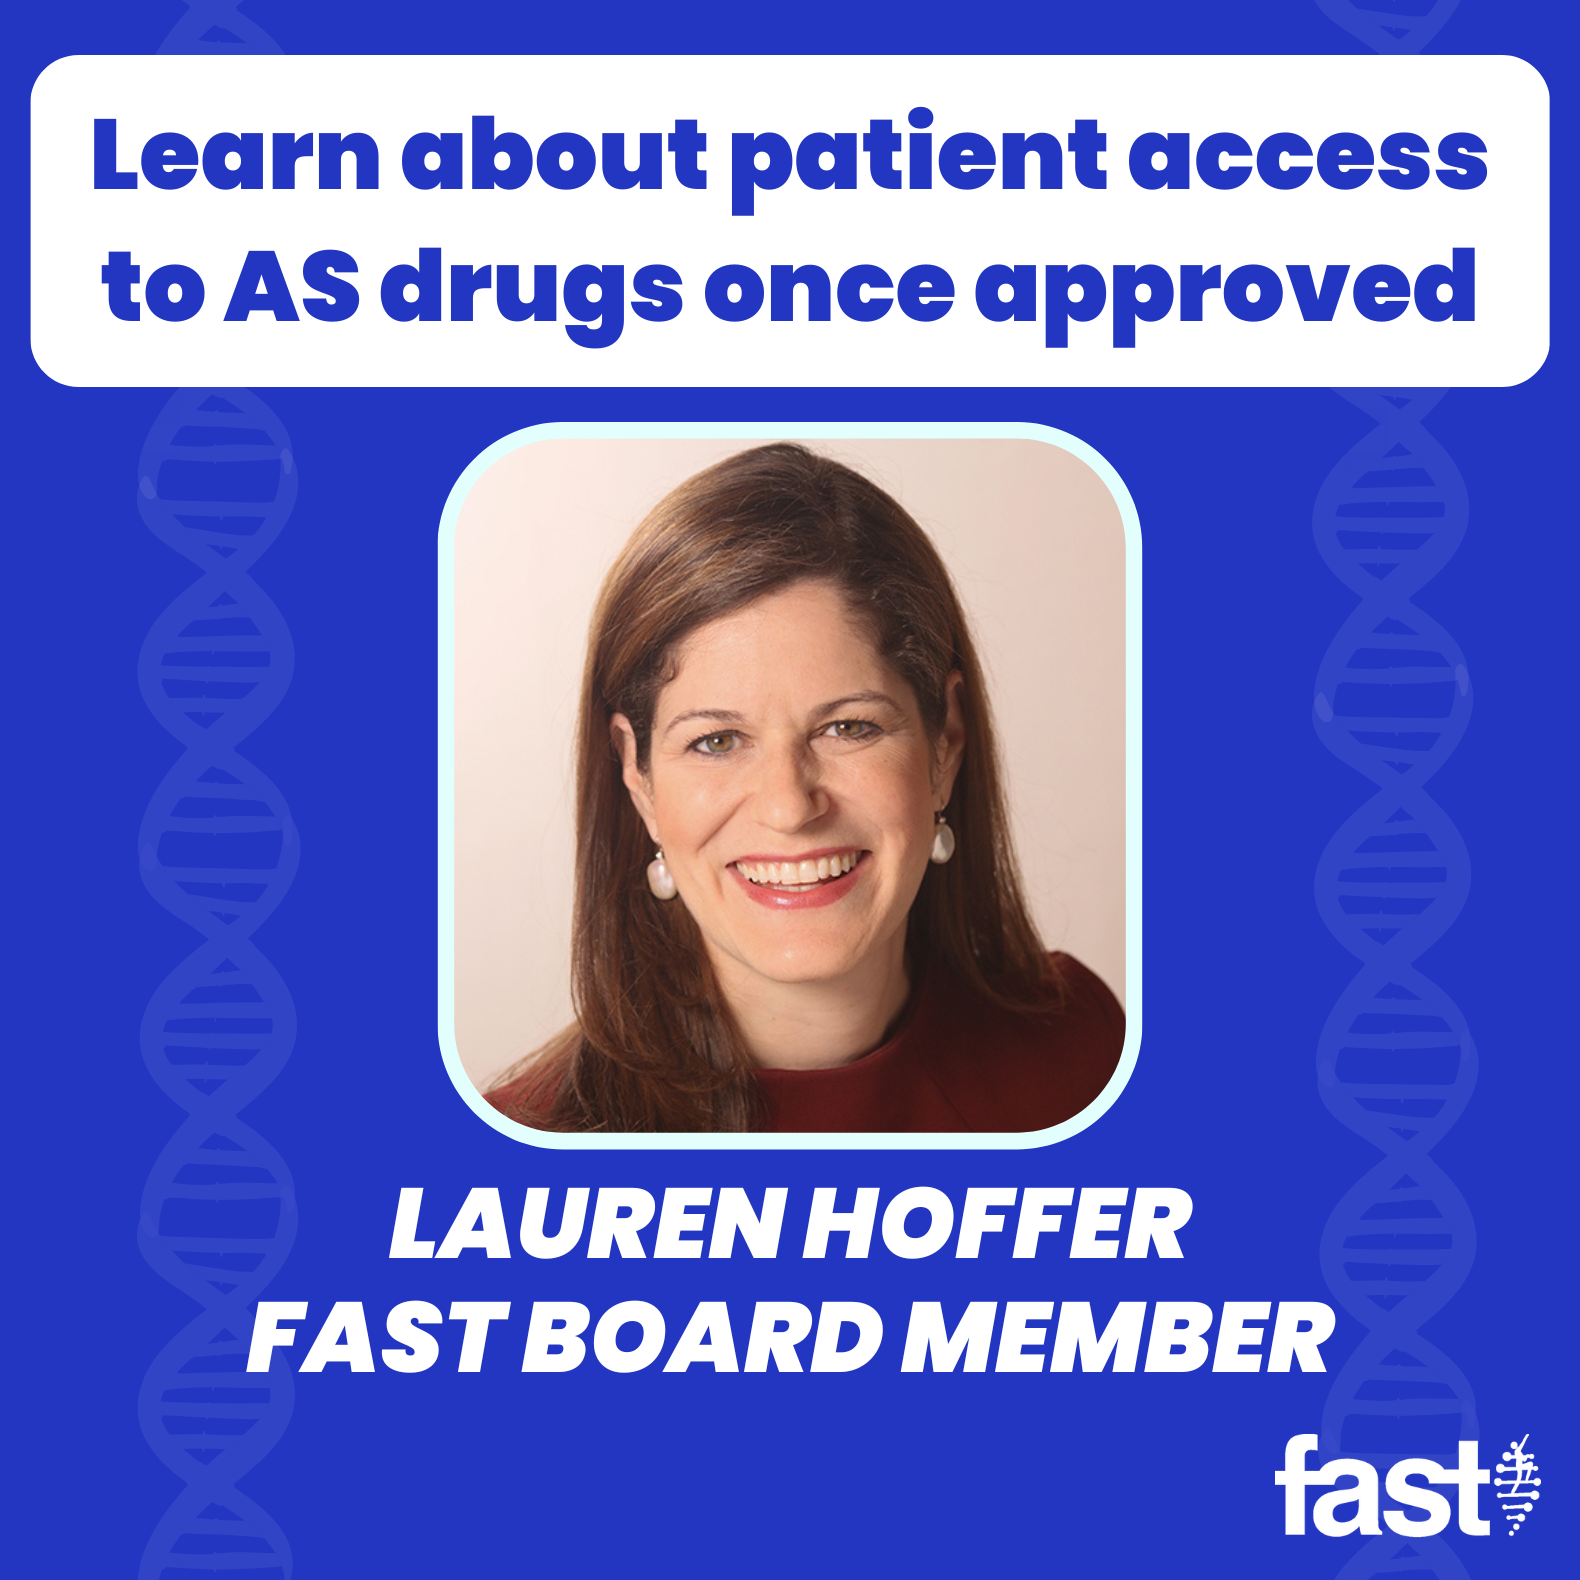 Learn about patient access to AS drugs once approved with Lauren Hoffer